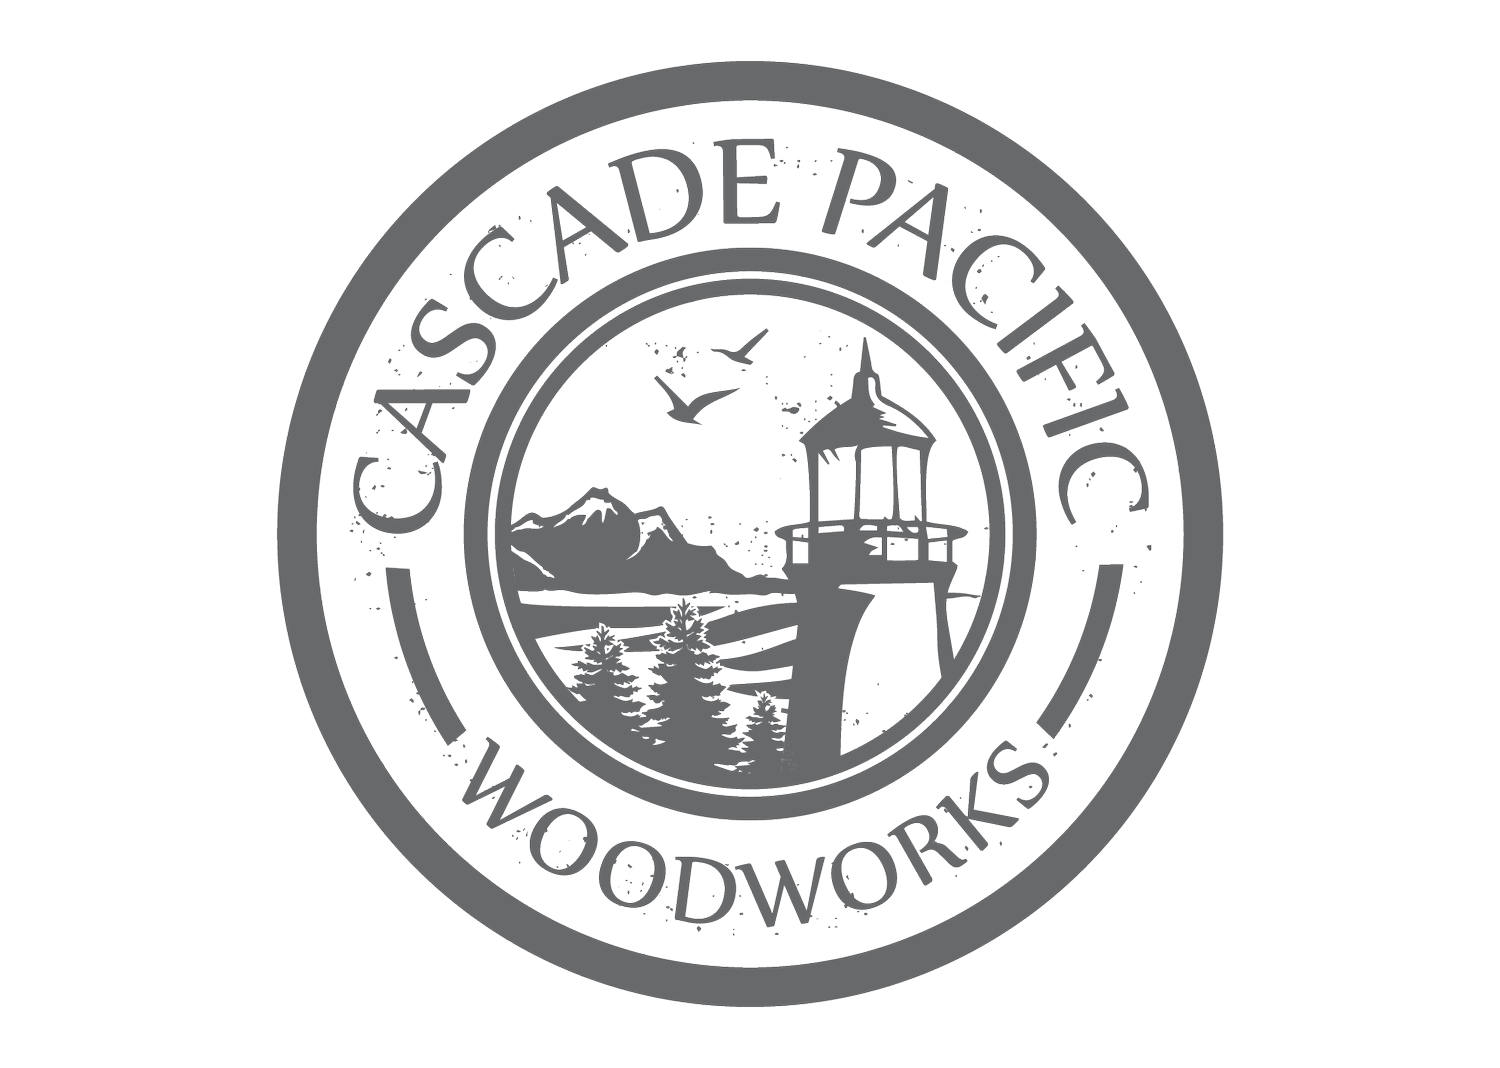 Cascade Pacific Woodworks